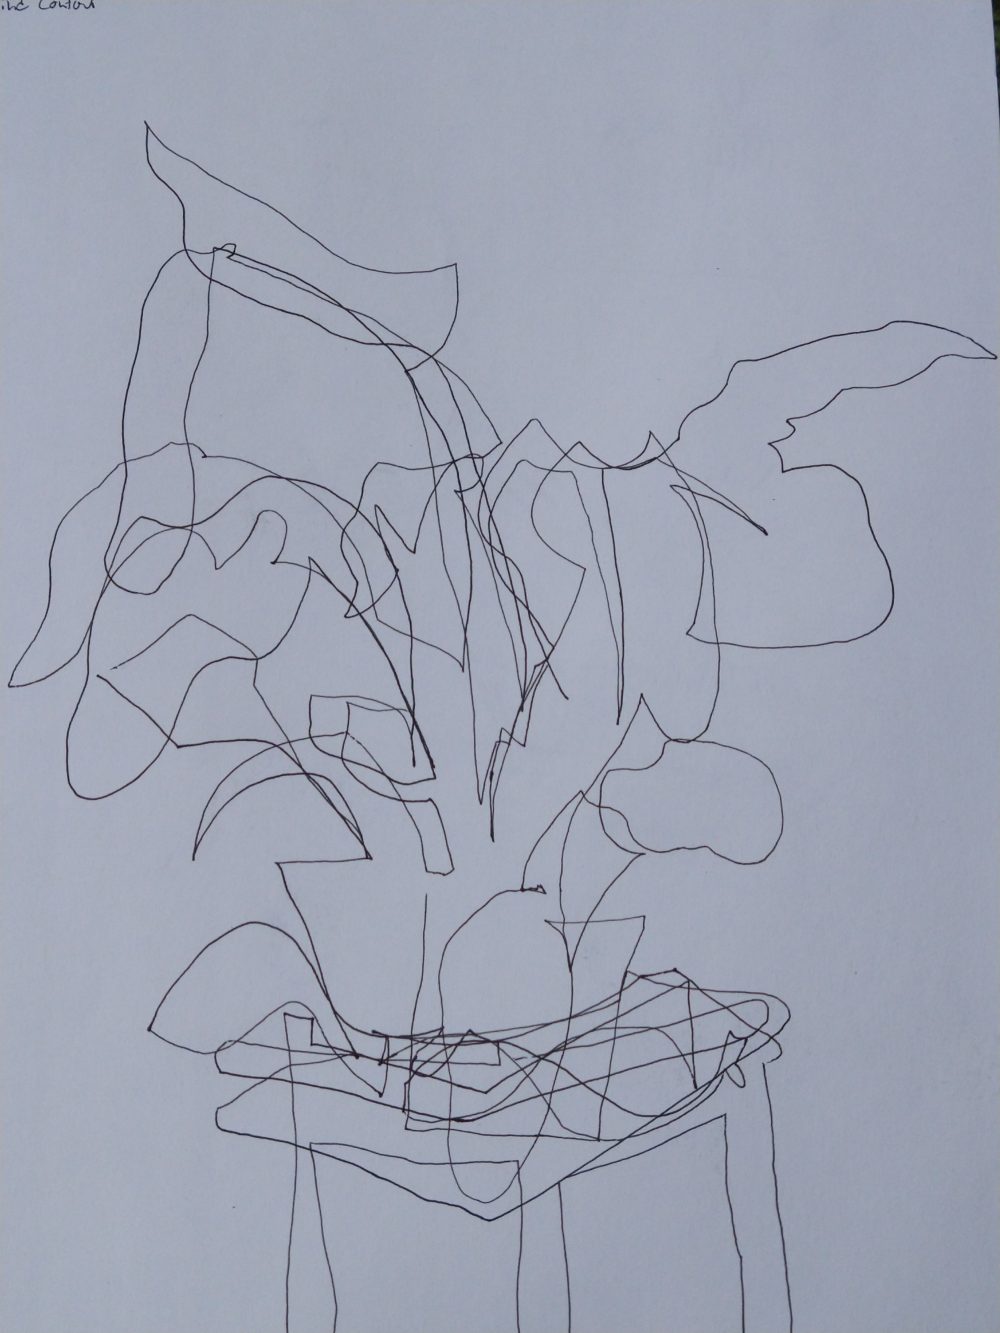 A drawing in black and white of a houseplant on a table, done in ballpoint pen on drawing paper using a blind contour method.